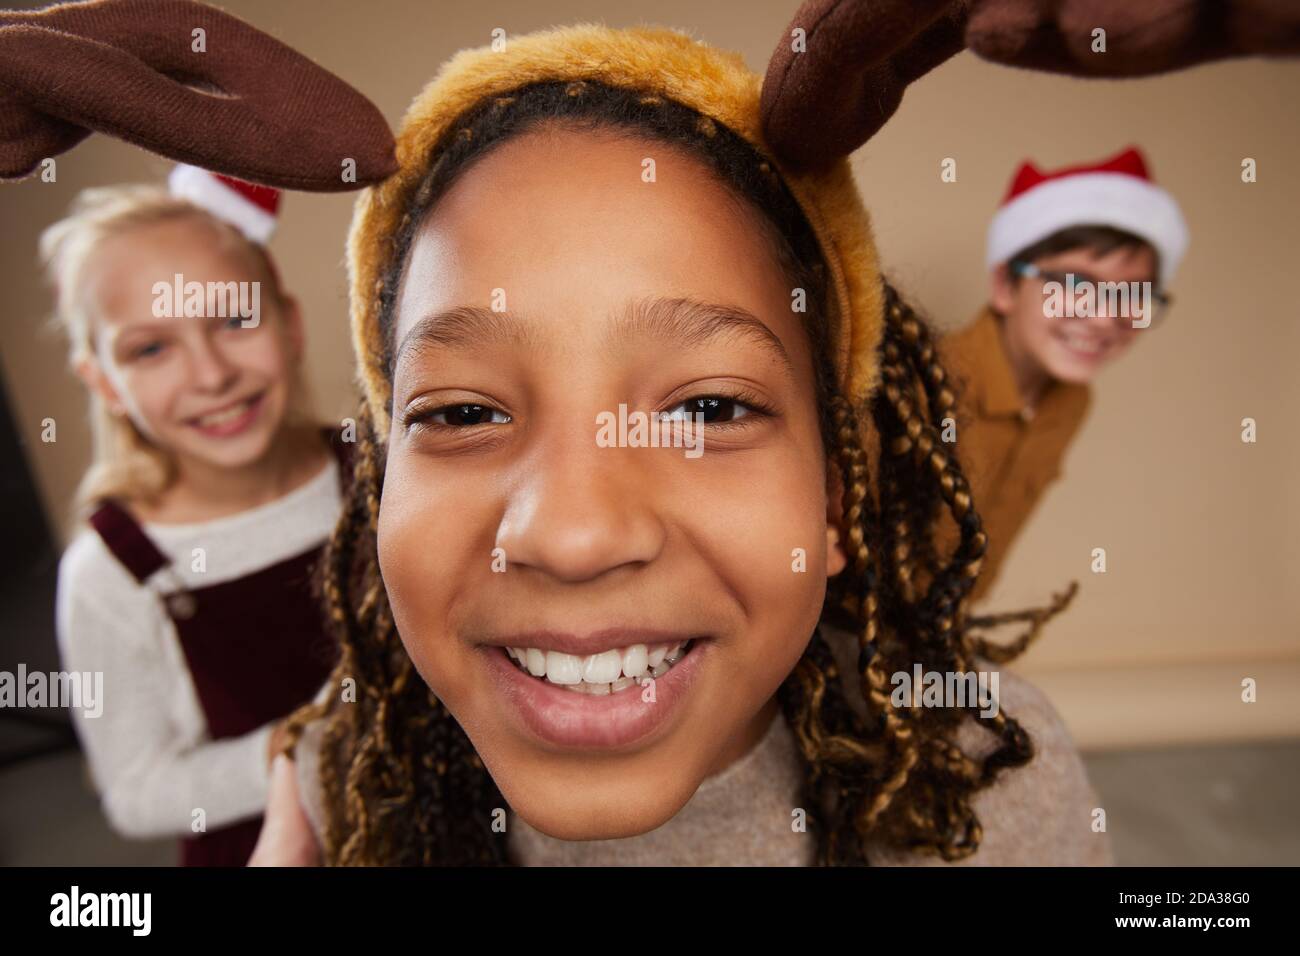 Fish eye portrait of three children wearing Christmas portraits and smiling at camera while standing against beinge background in studio Stock Photo